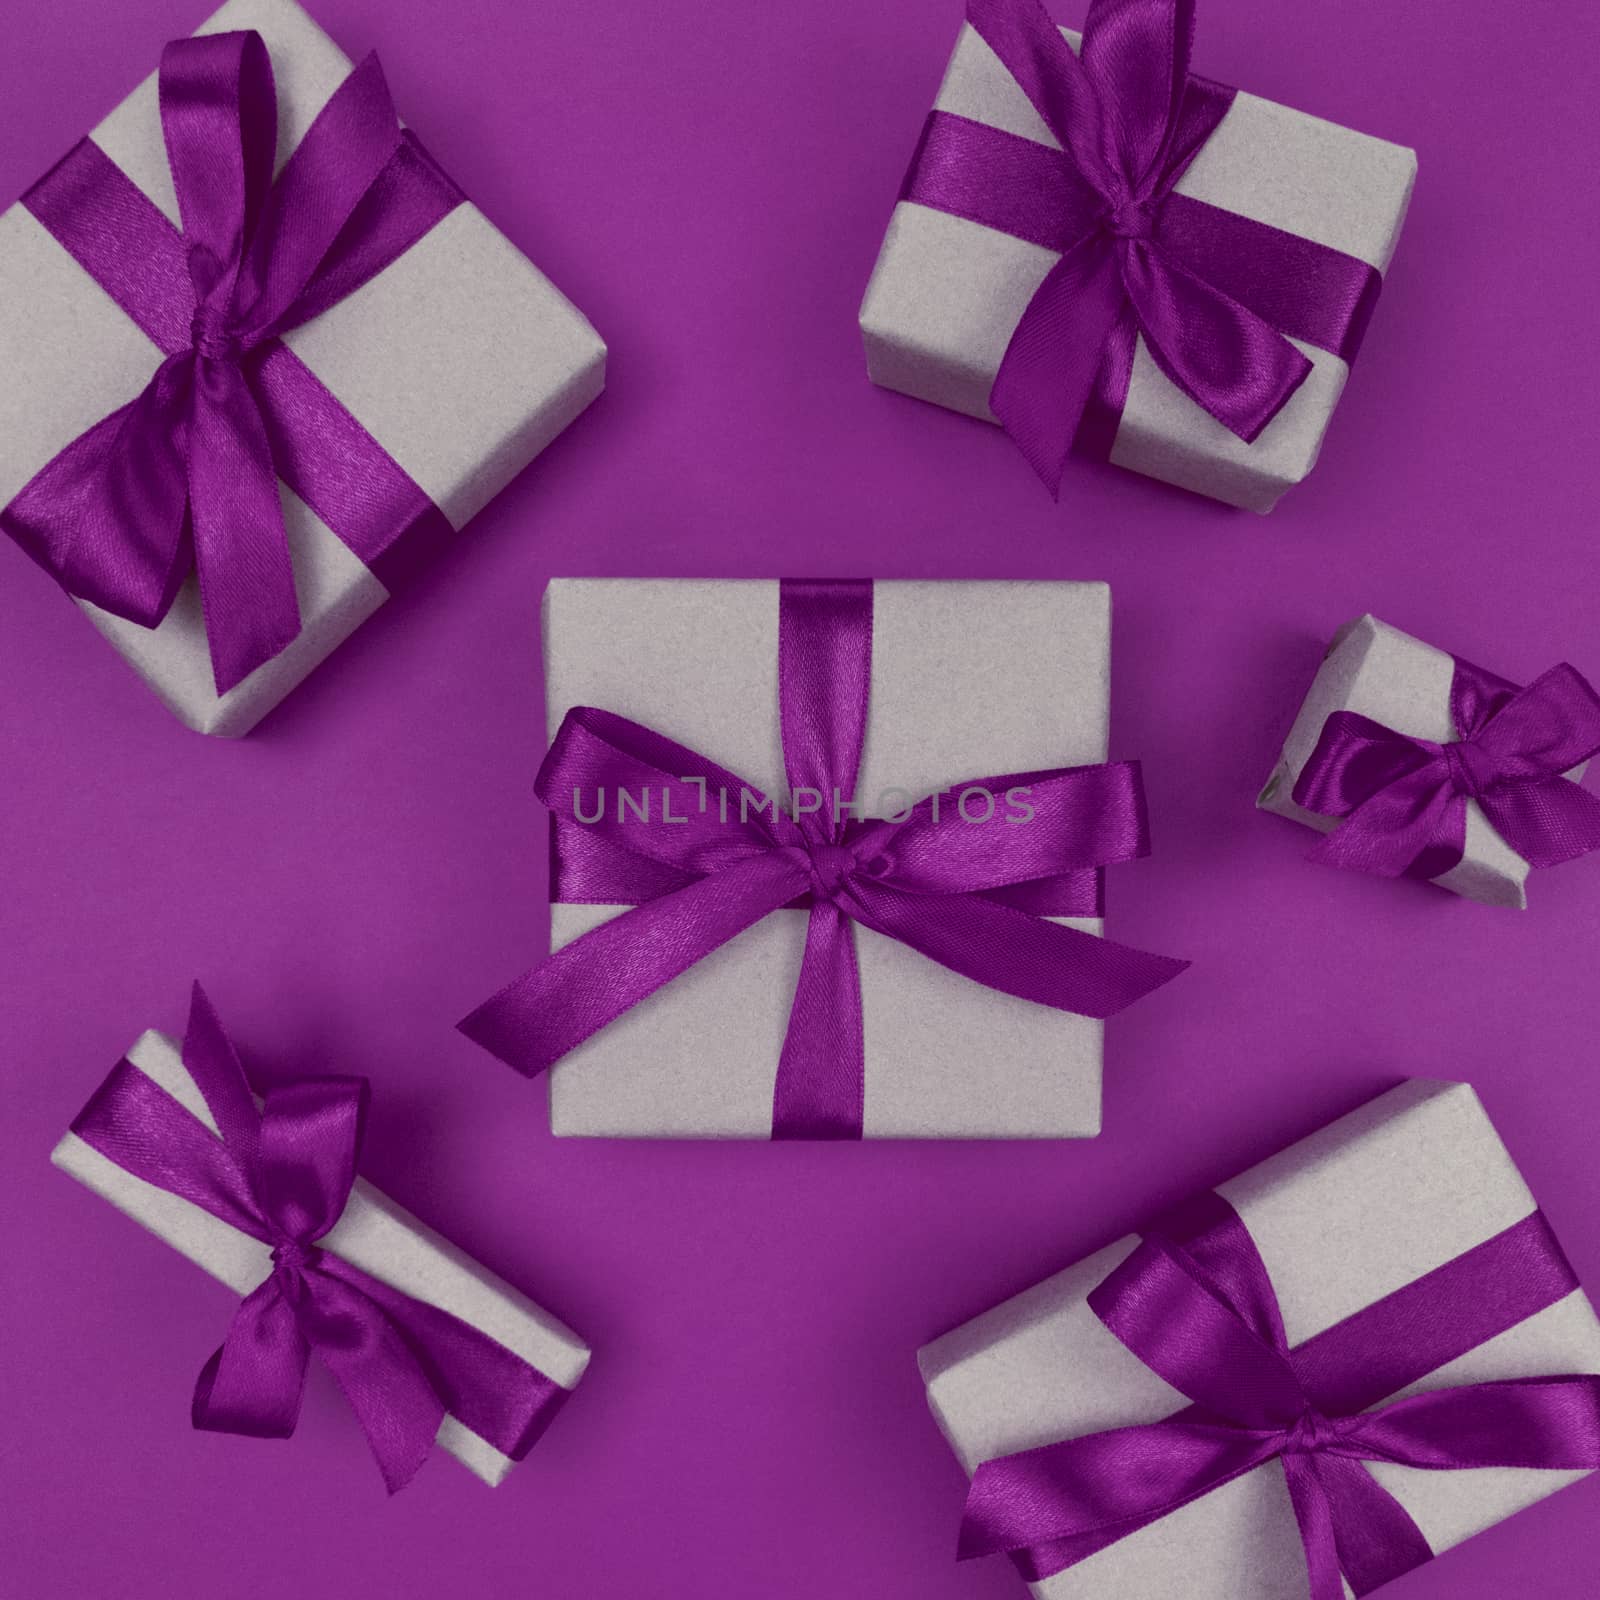 Gift boxes wrapped in a craft paper with purple ribbons and bows. Festive monochrome flat lay.